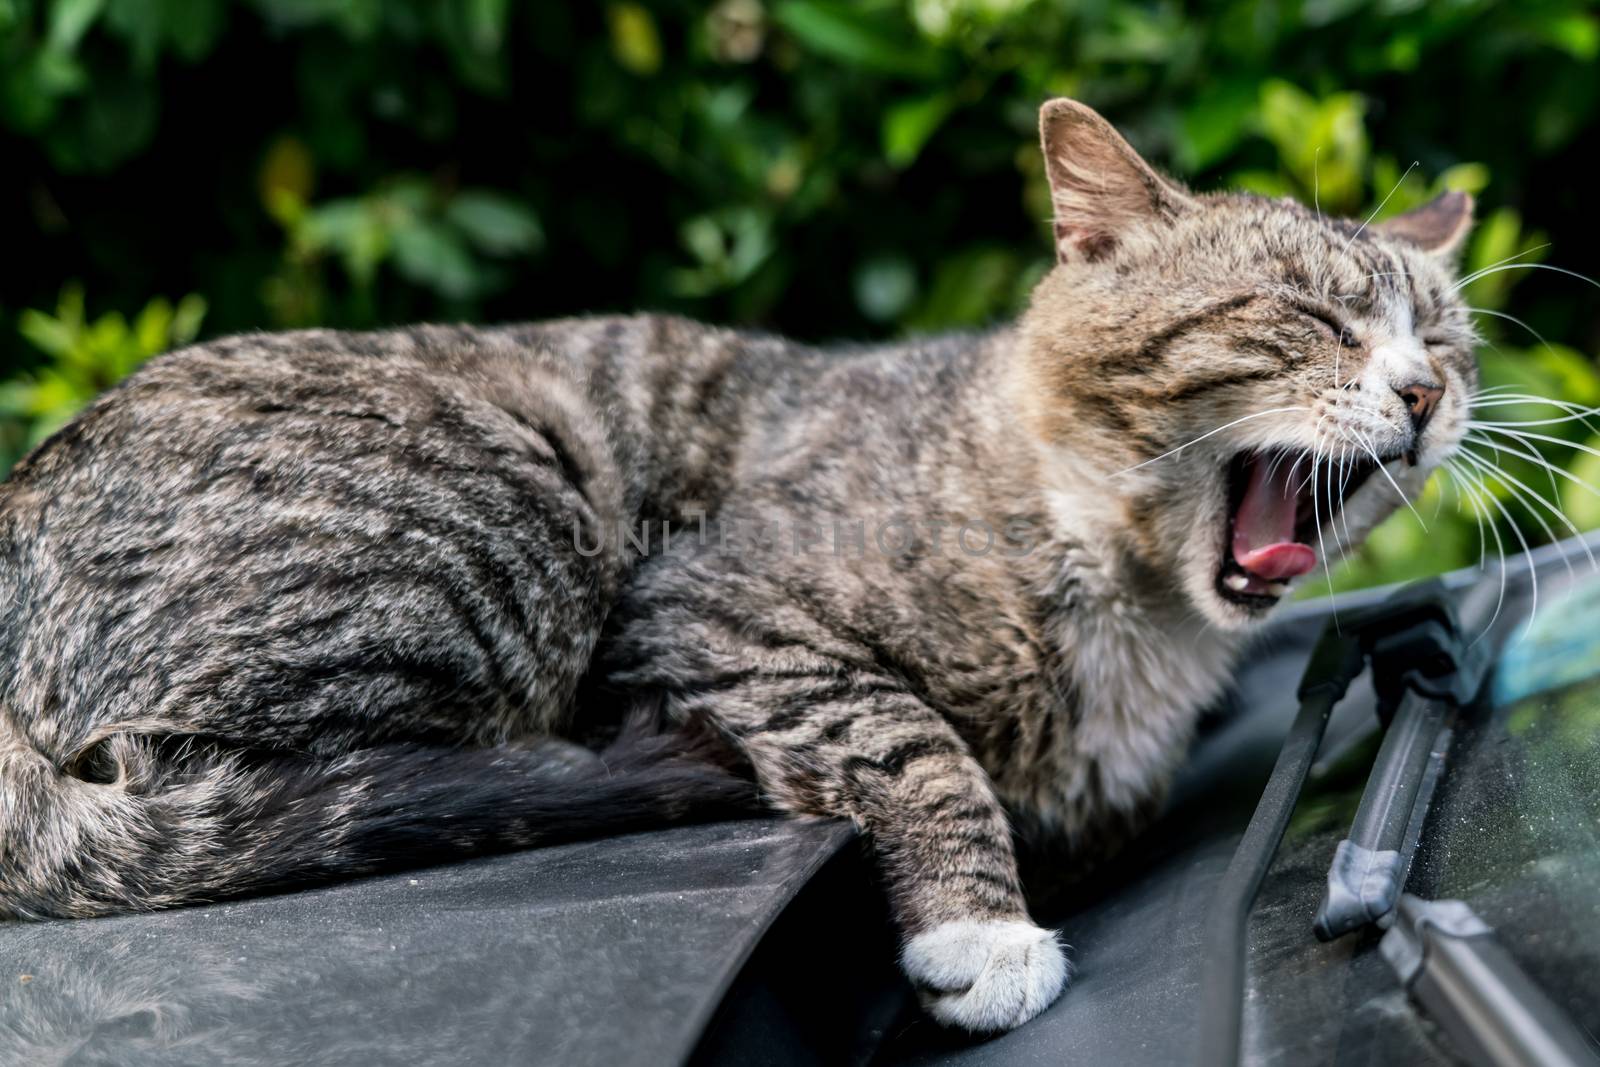 A lazy brown striped cat yawning while laying down on the car windshield